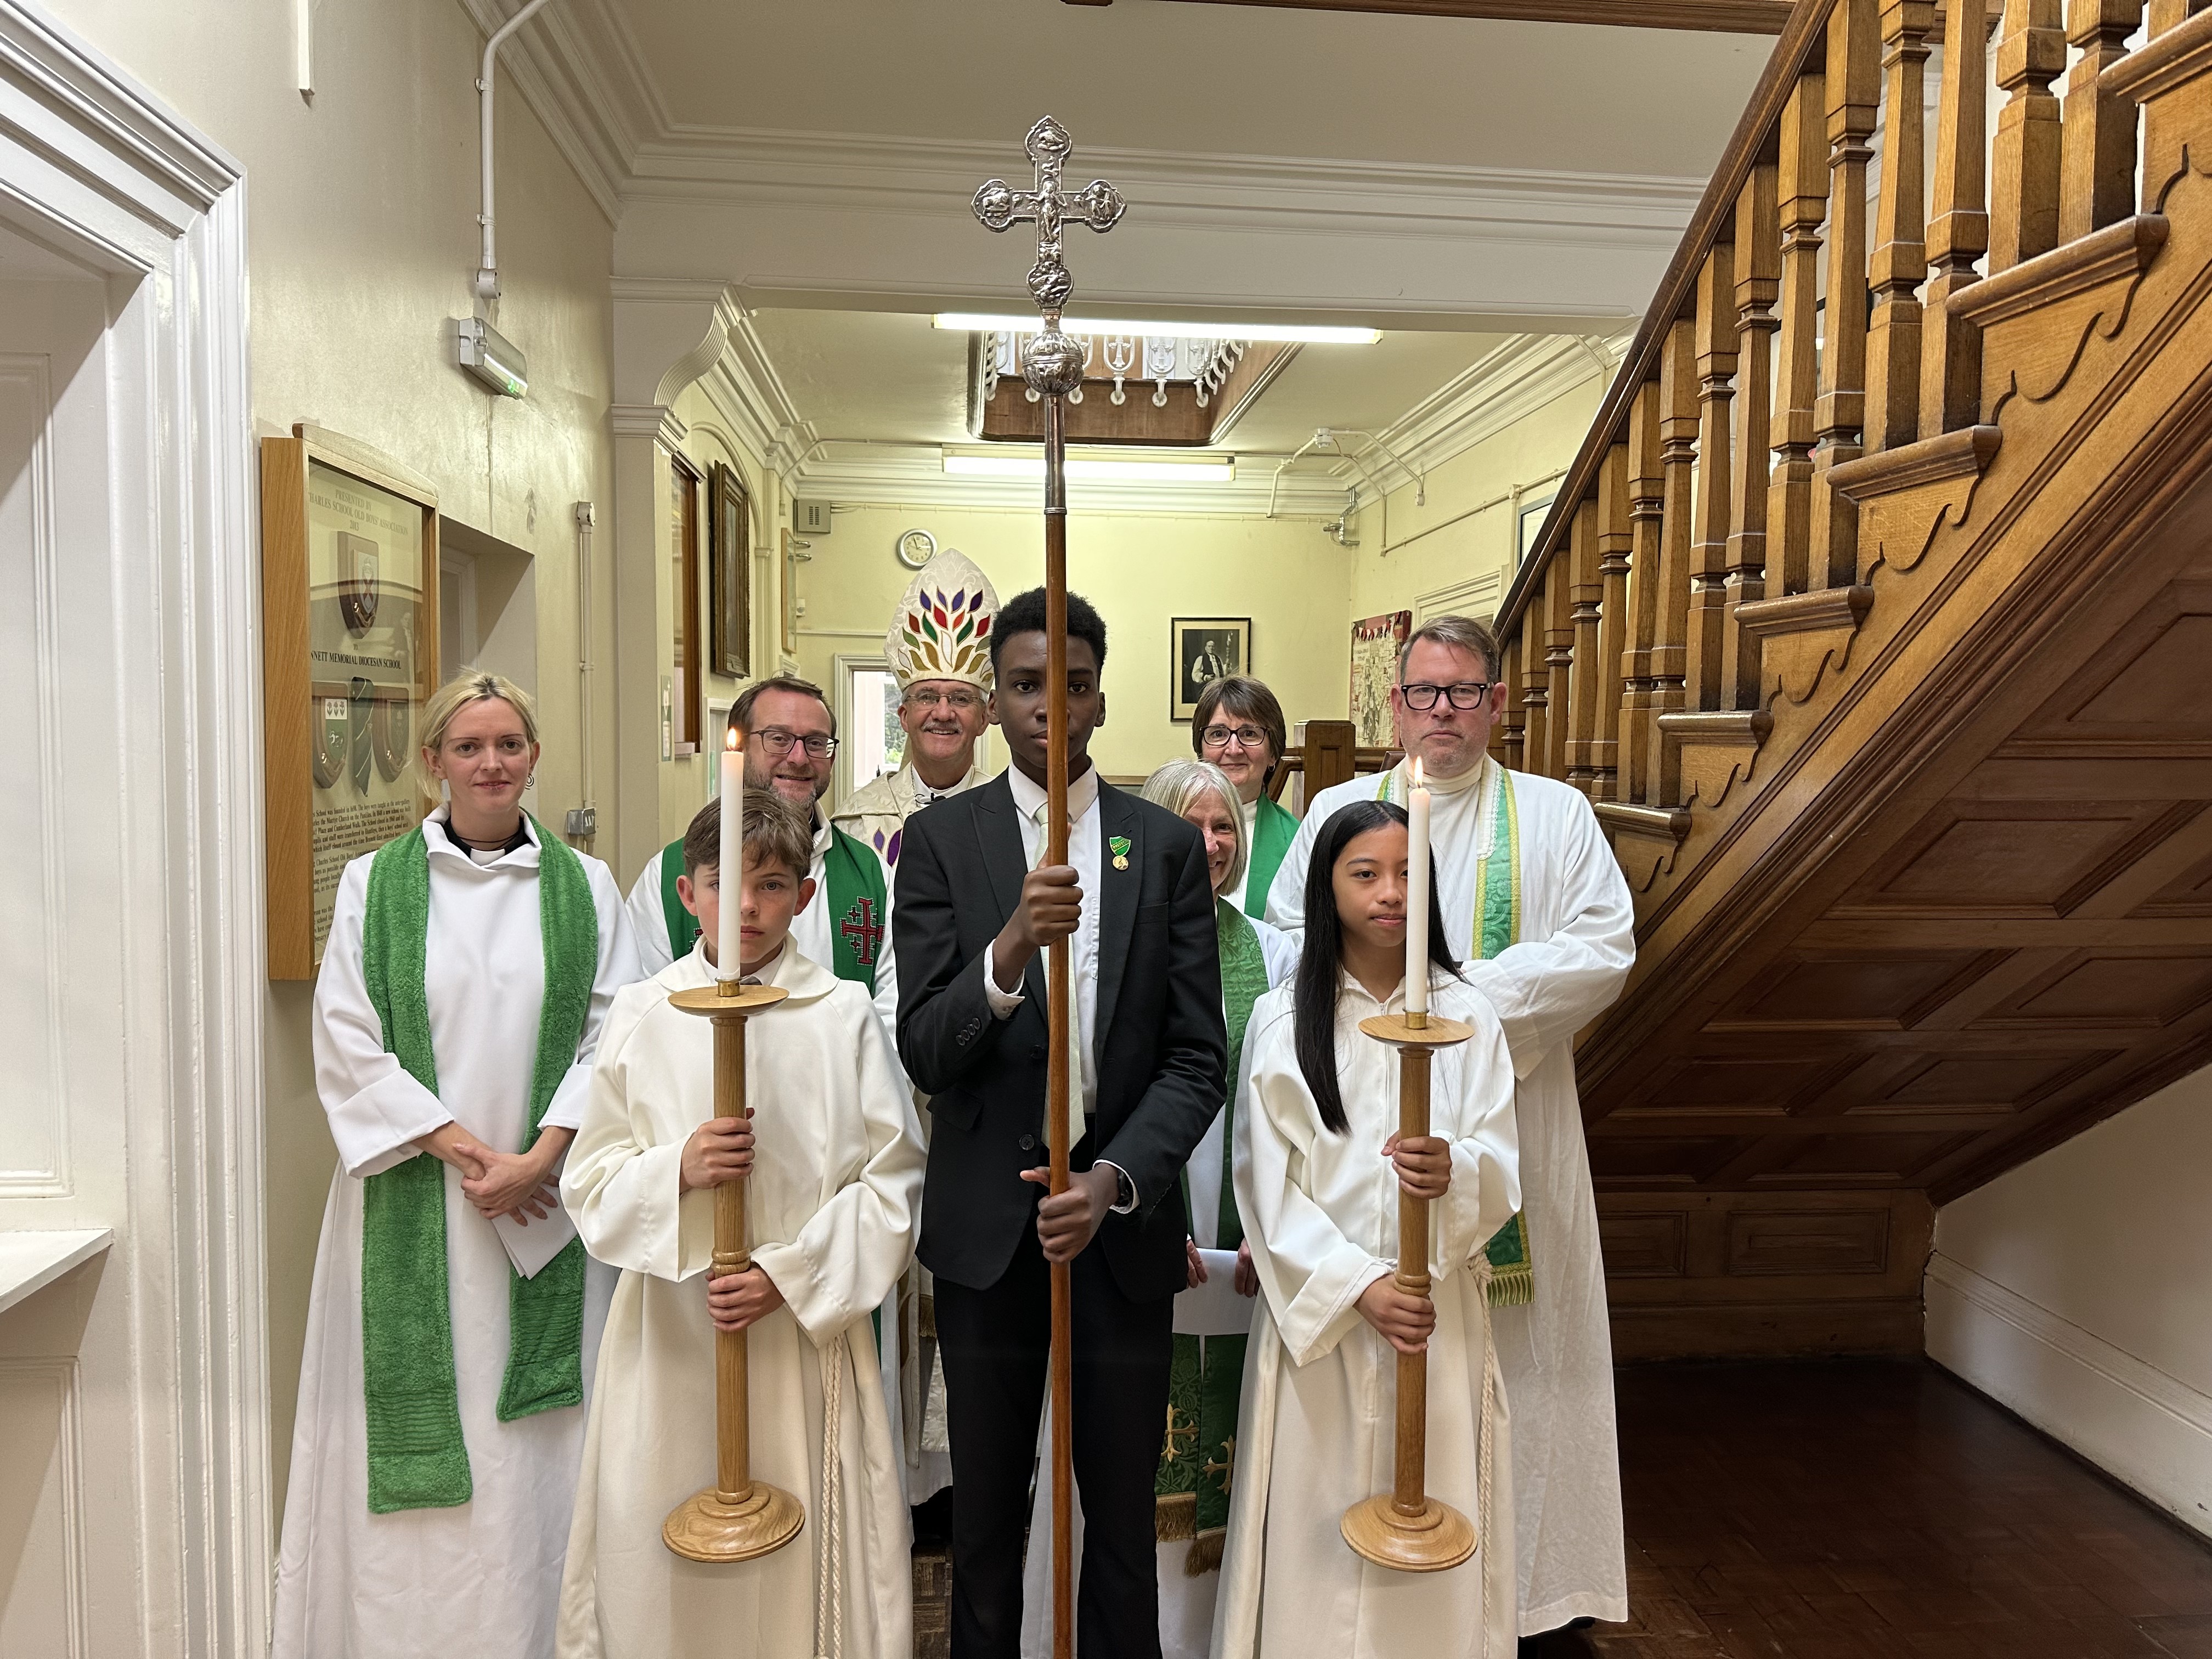 Bennet Memorial students prepare for worship with Bishop Jonathan and other local clergy